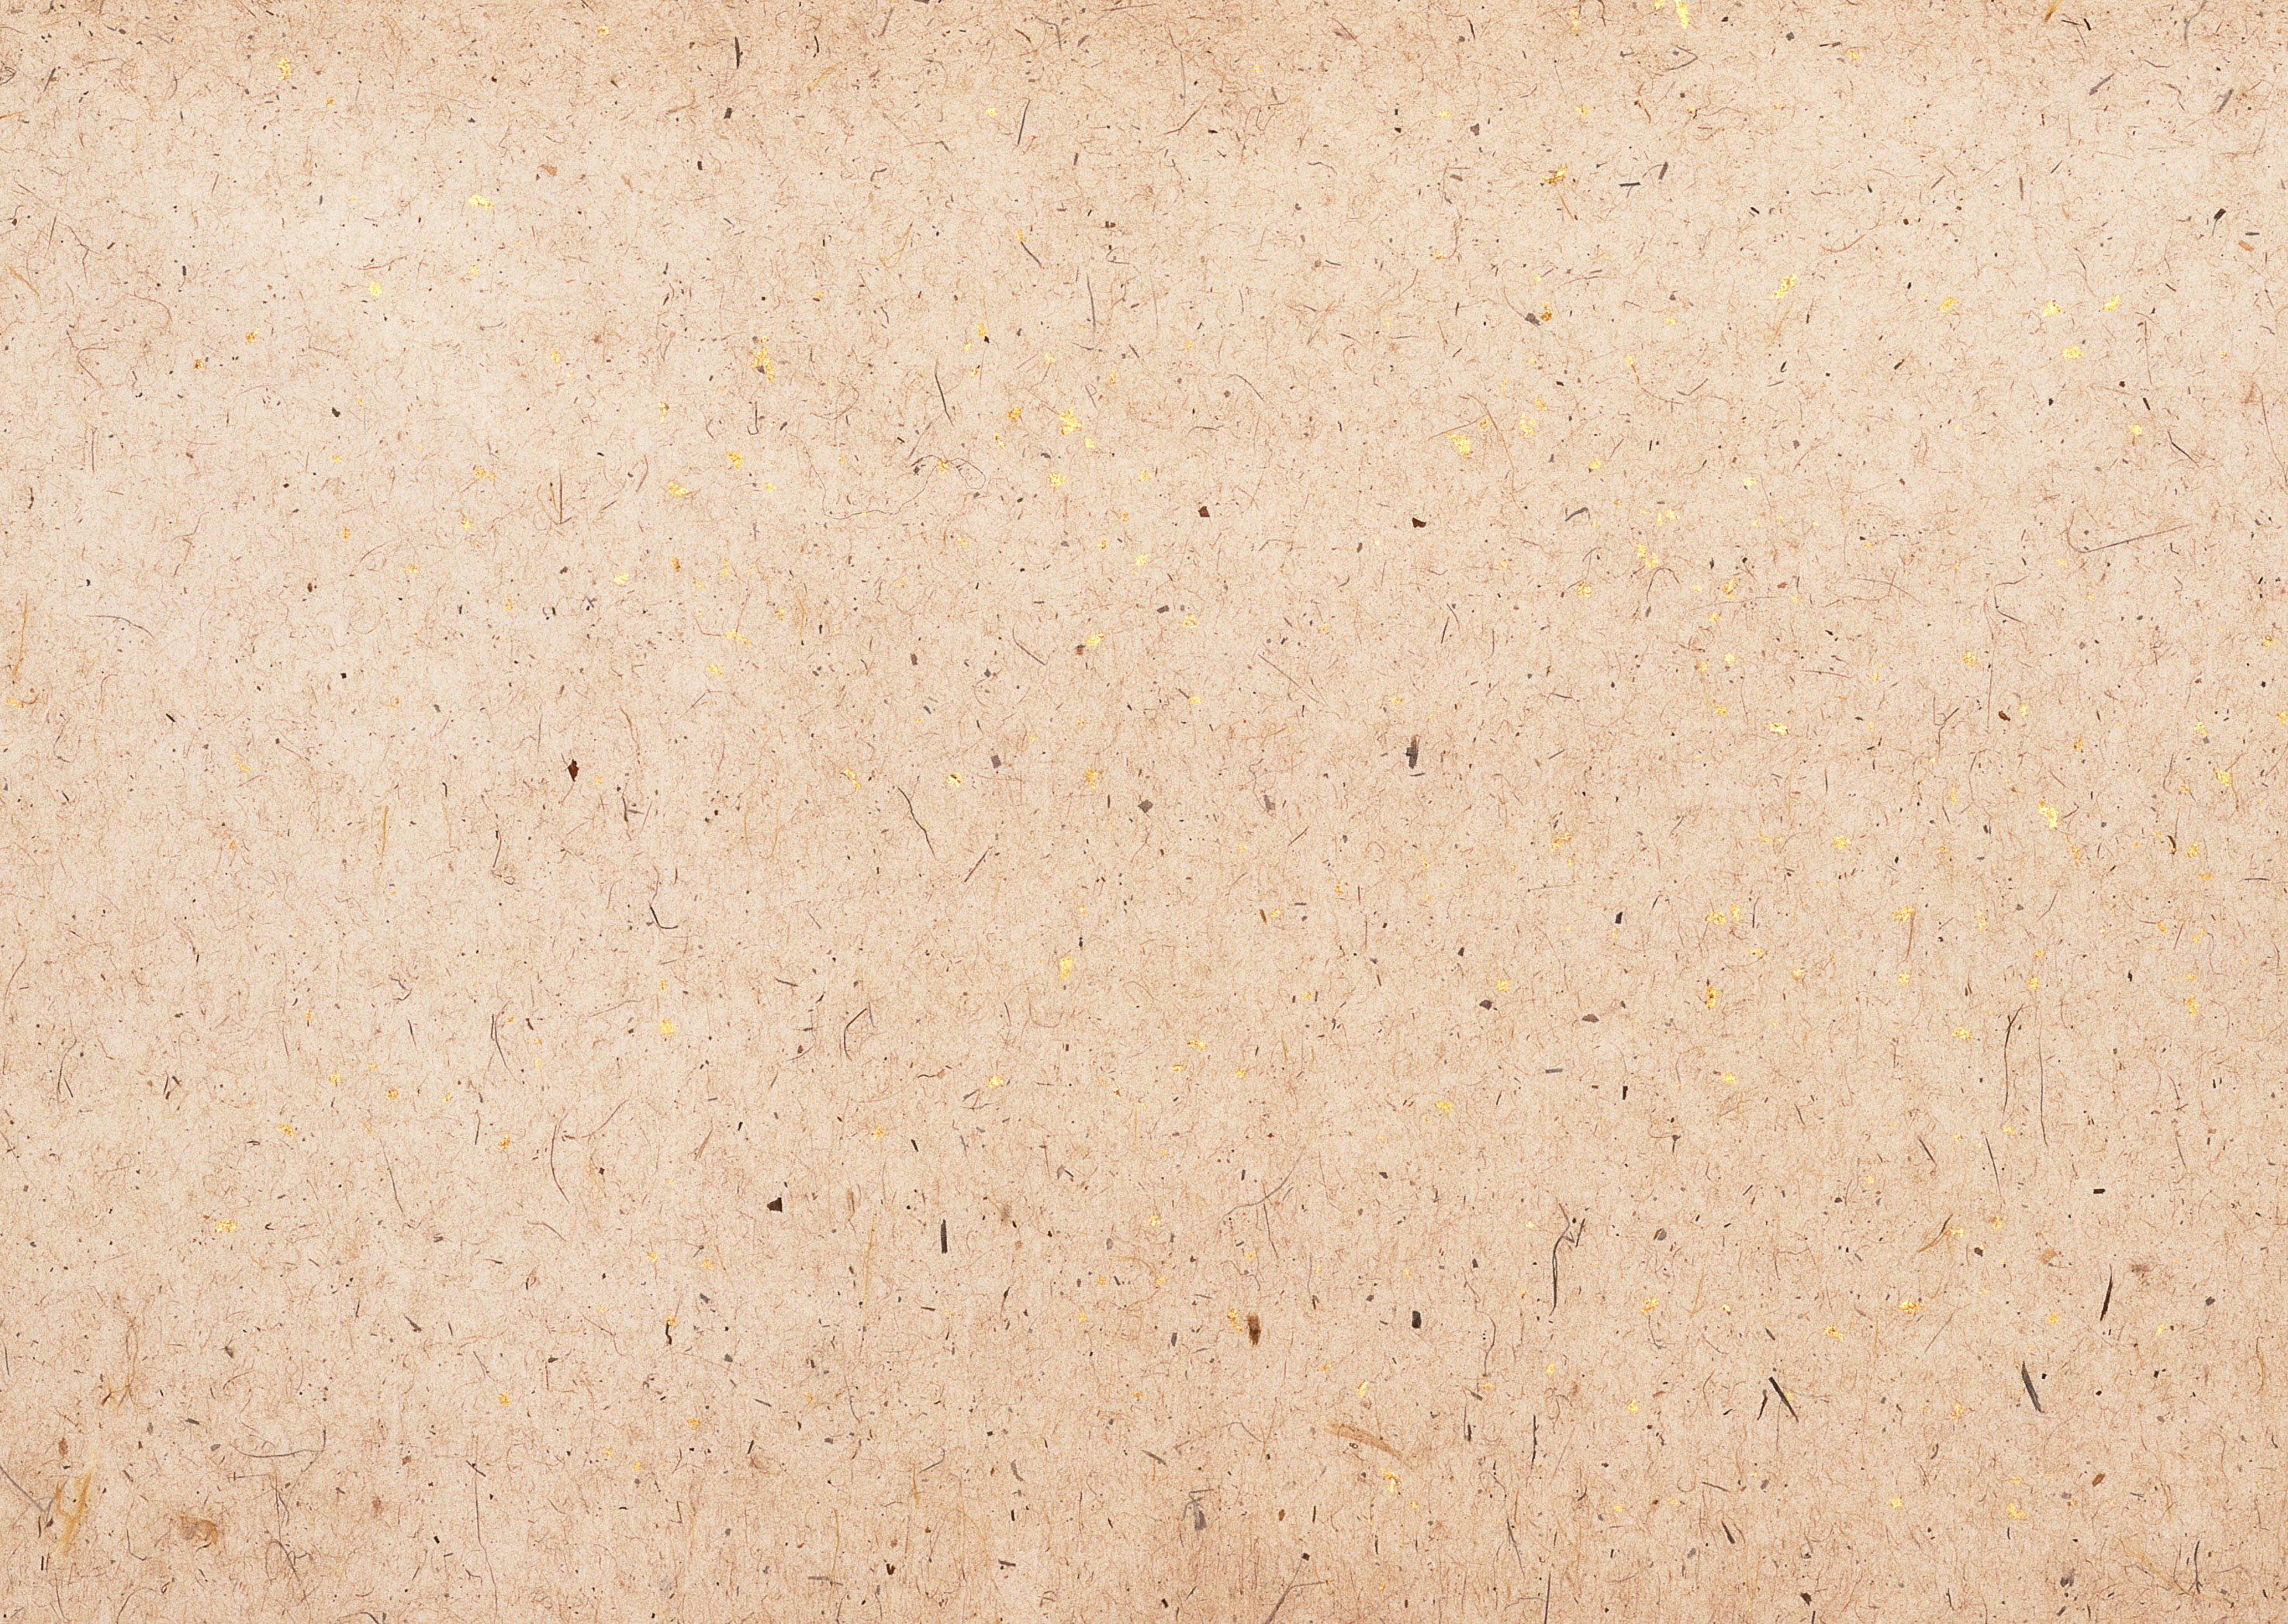 texture paper, paper texture, old battered paper, download photo, image, background, background